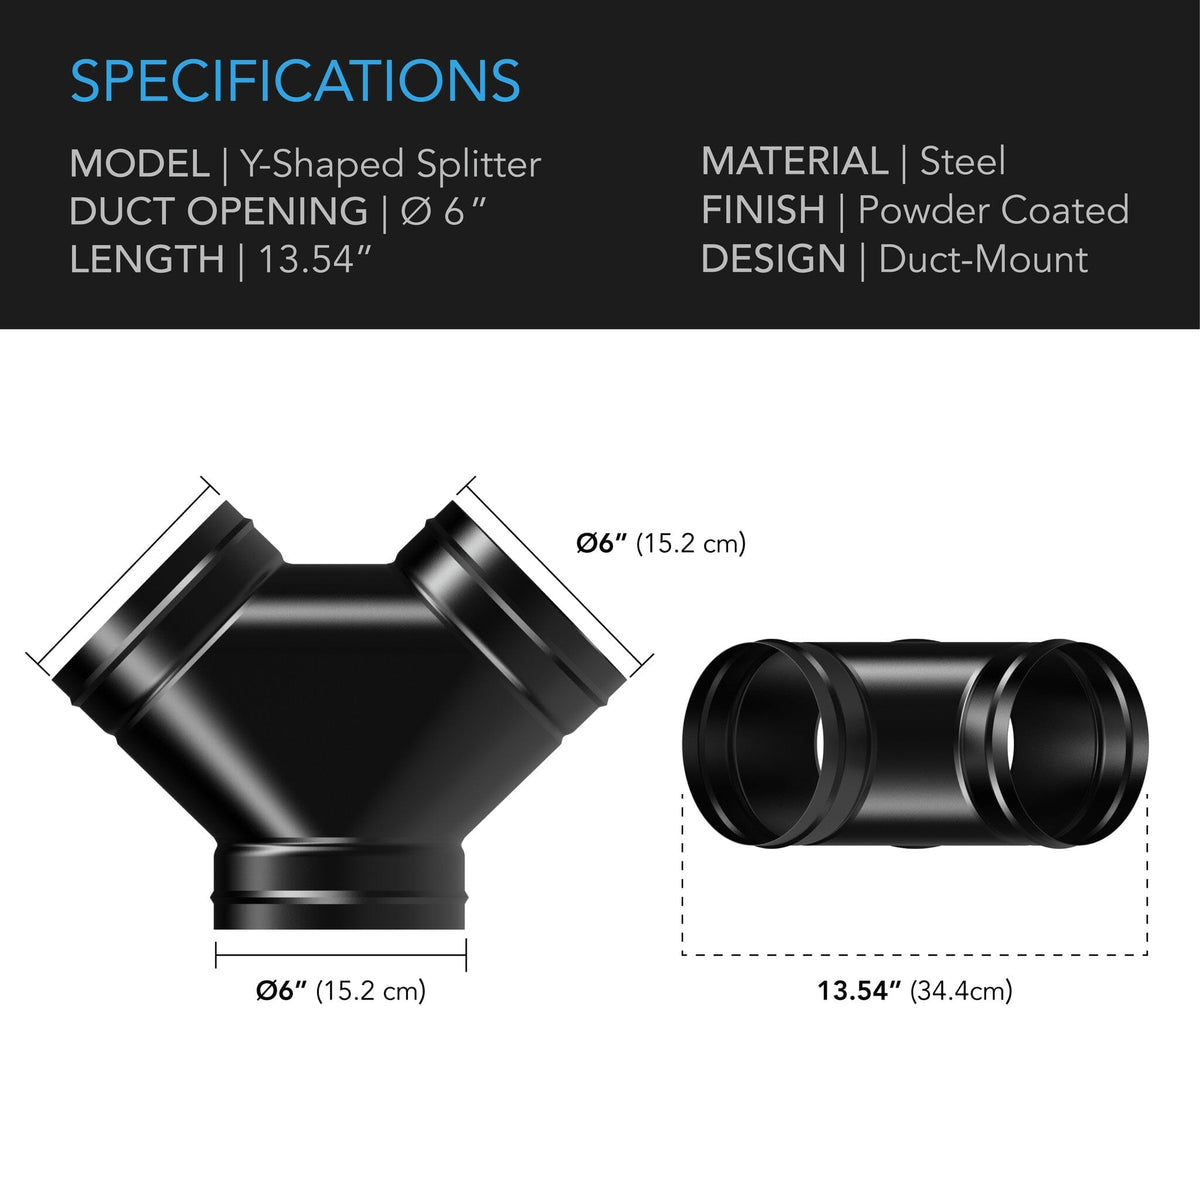 3-Way Duct Splitter 6 Inch Specifications